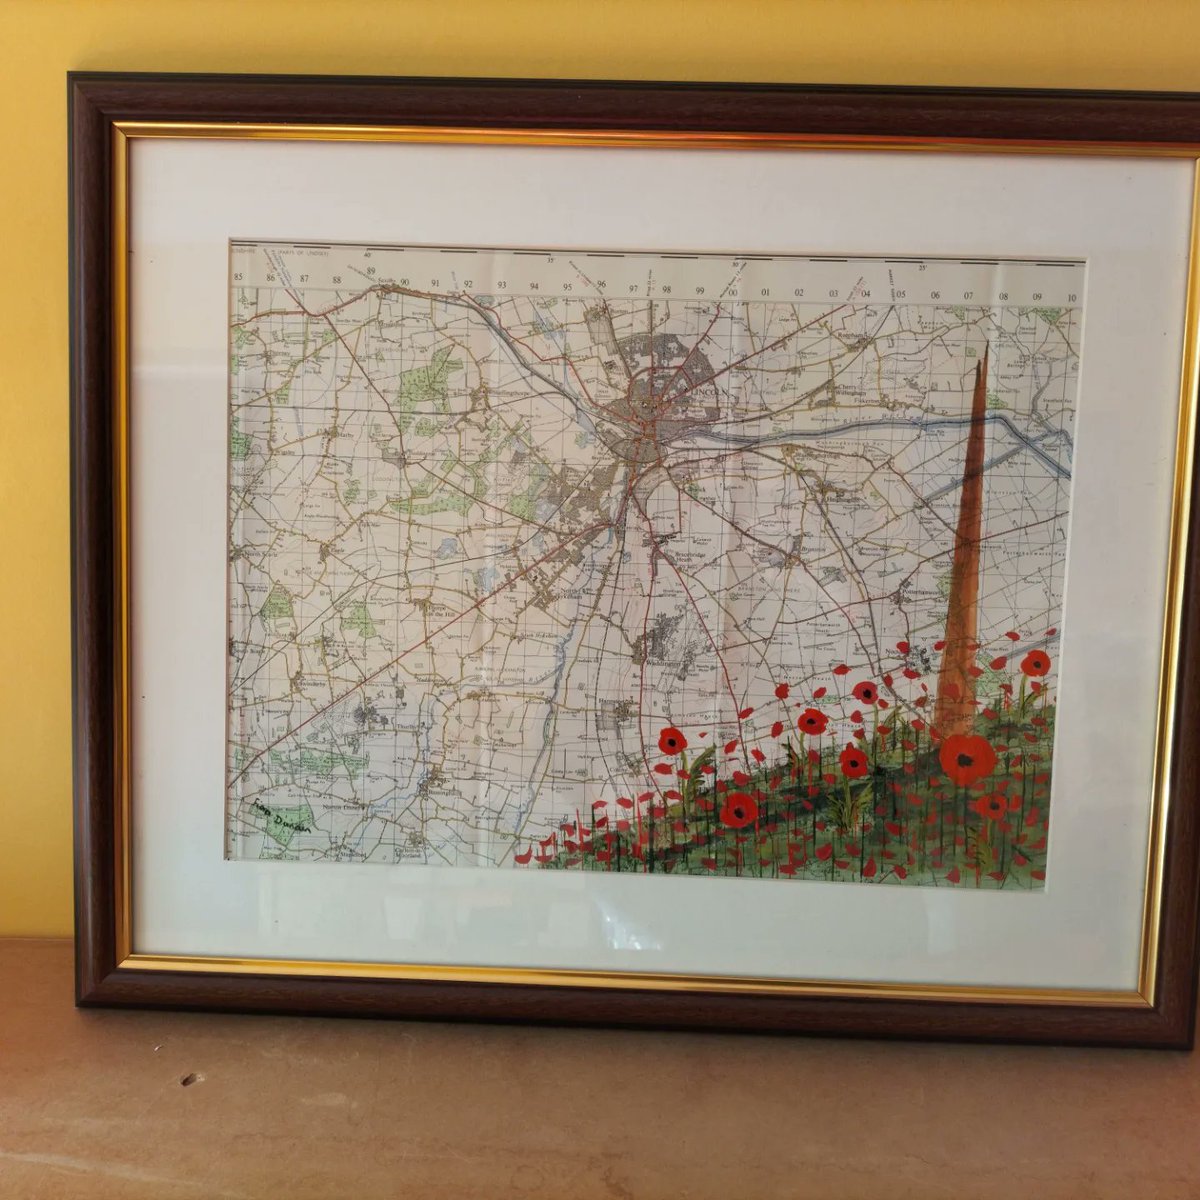 #Lincolnshire is famous for it's links with the #RAF These paintings on #VintageMaps feature the Typhoon aircraft and the @IntBCC spire with #Poppies
Prints online at lincolnmaplady.co.uk
#EarlyBiz #LincsConnect #BritishVeteranOwned #MHHSBD